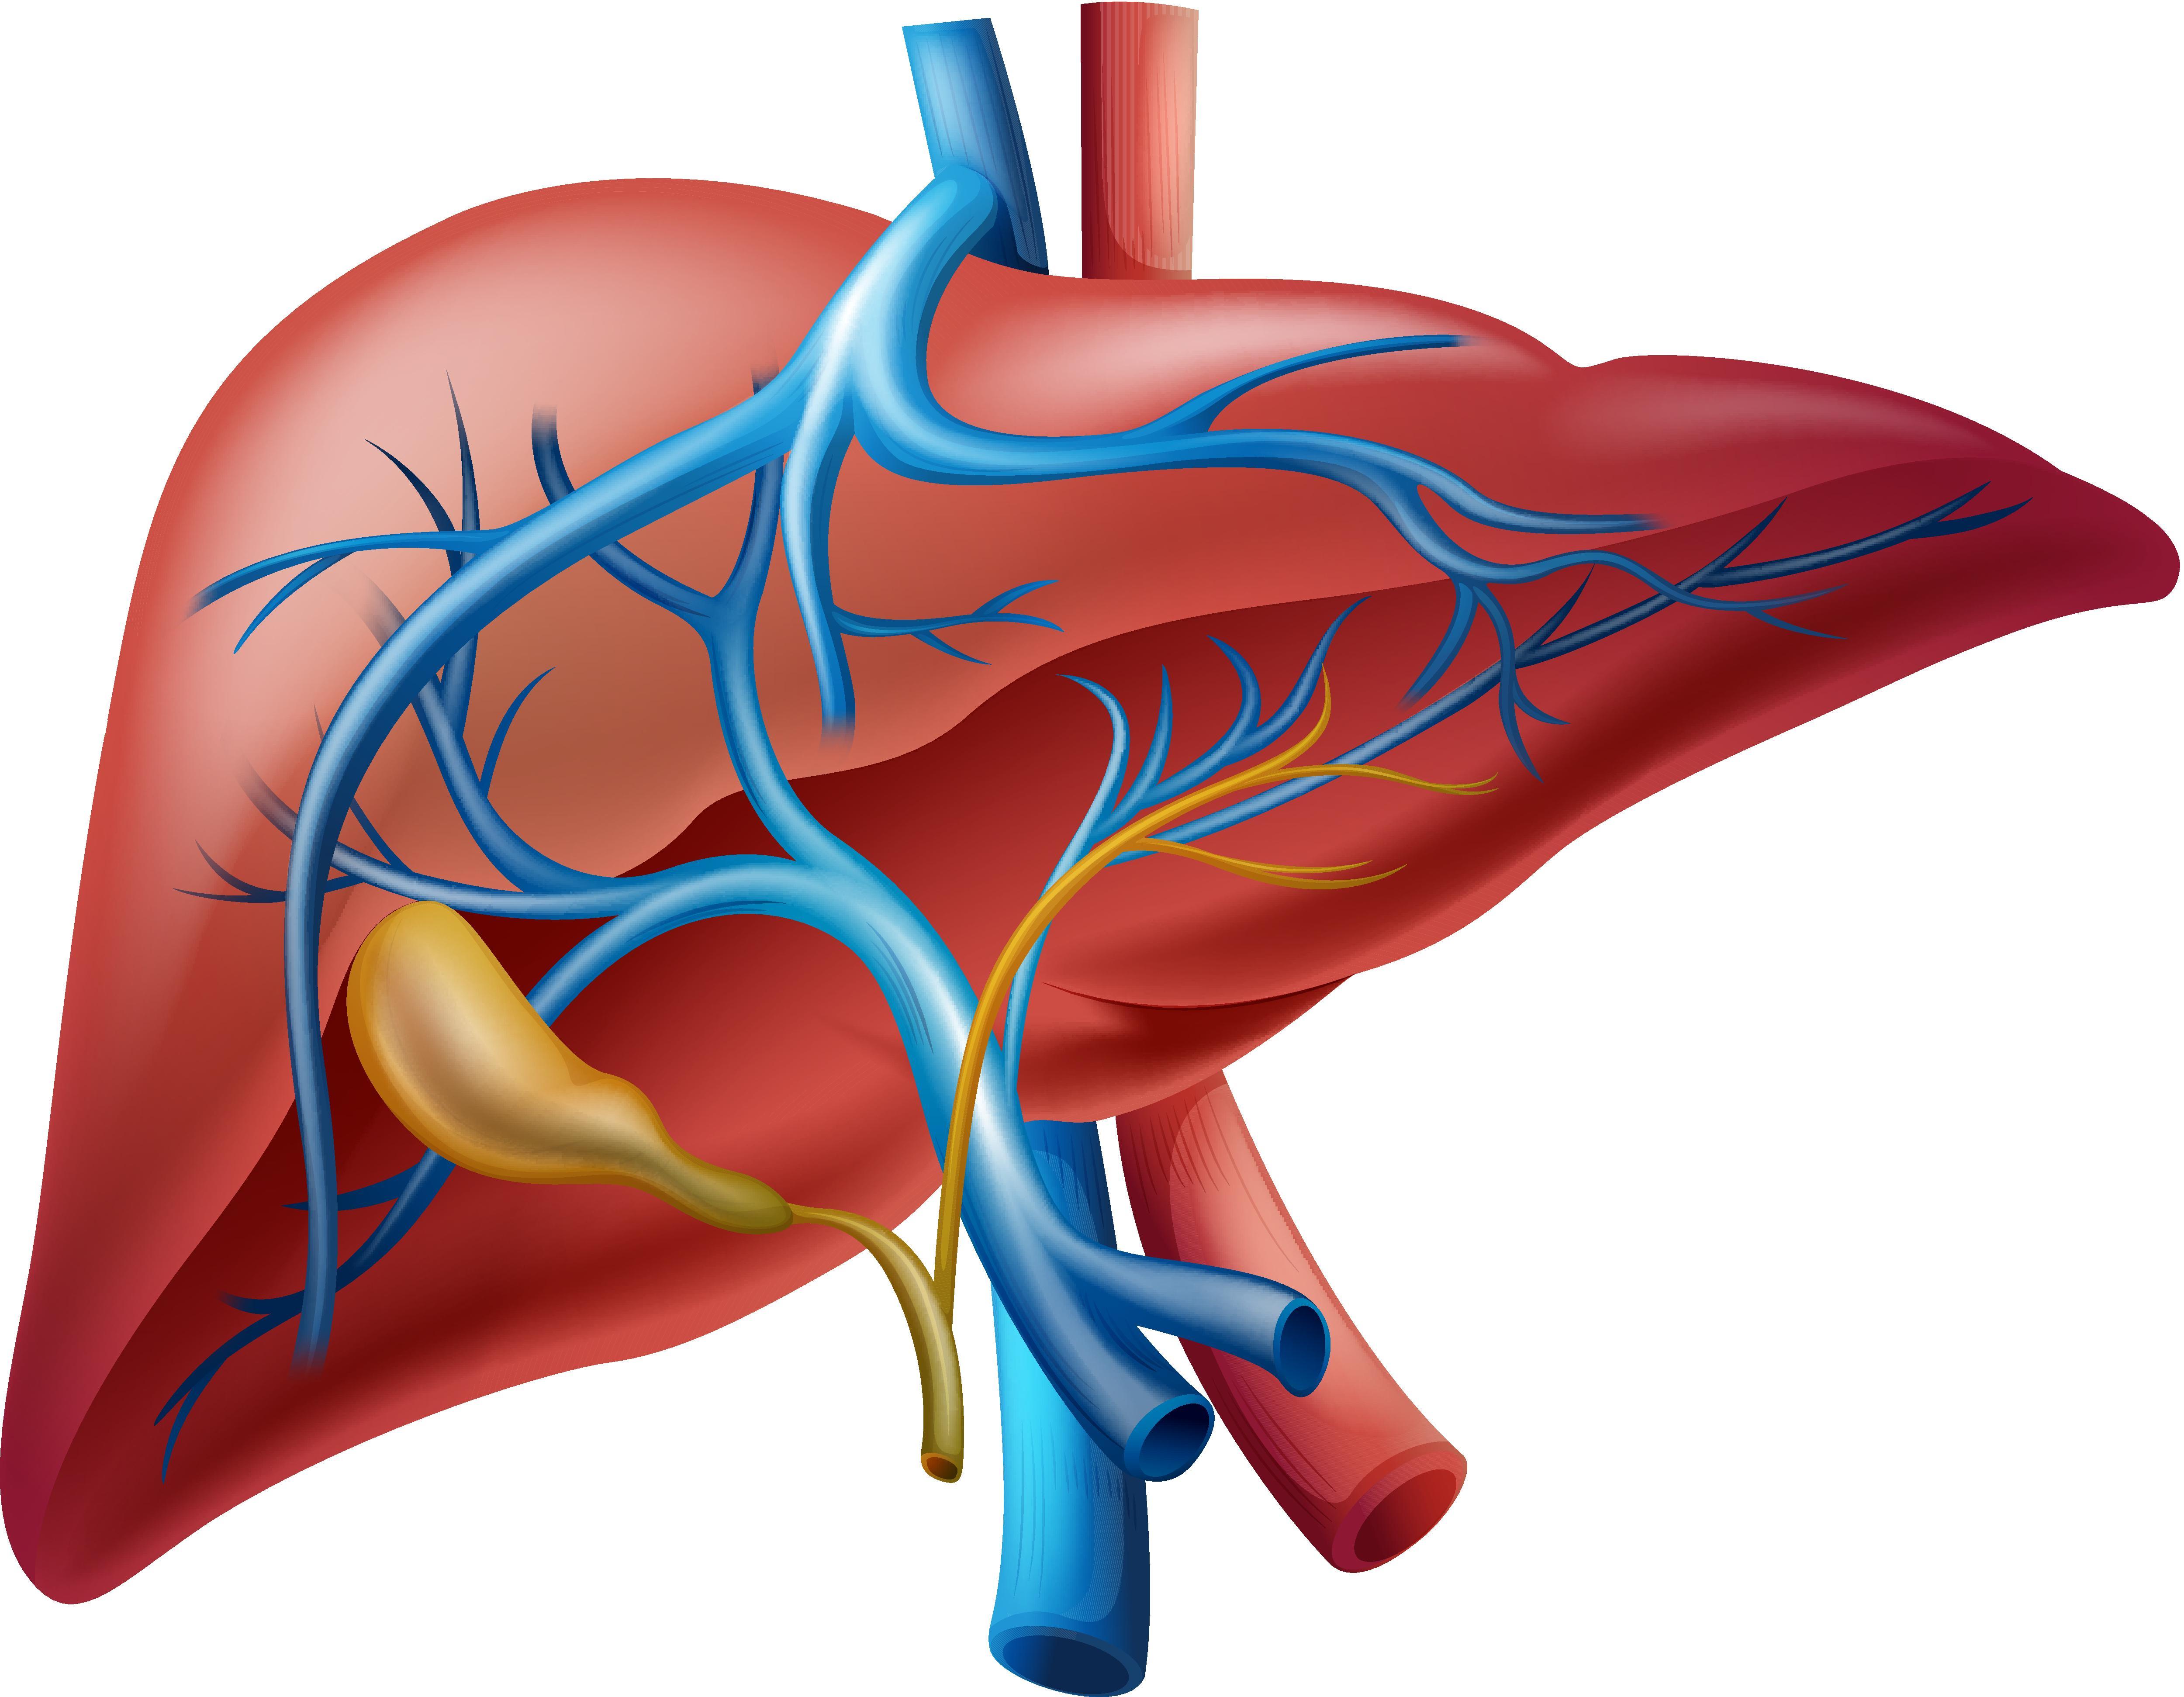 Hepatobiliary Surgery and Nutrition：<font color="red">使用</font>机器学习<font color="red">策略</font>预测和验证肝内胆管癌的预后甲基化评分